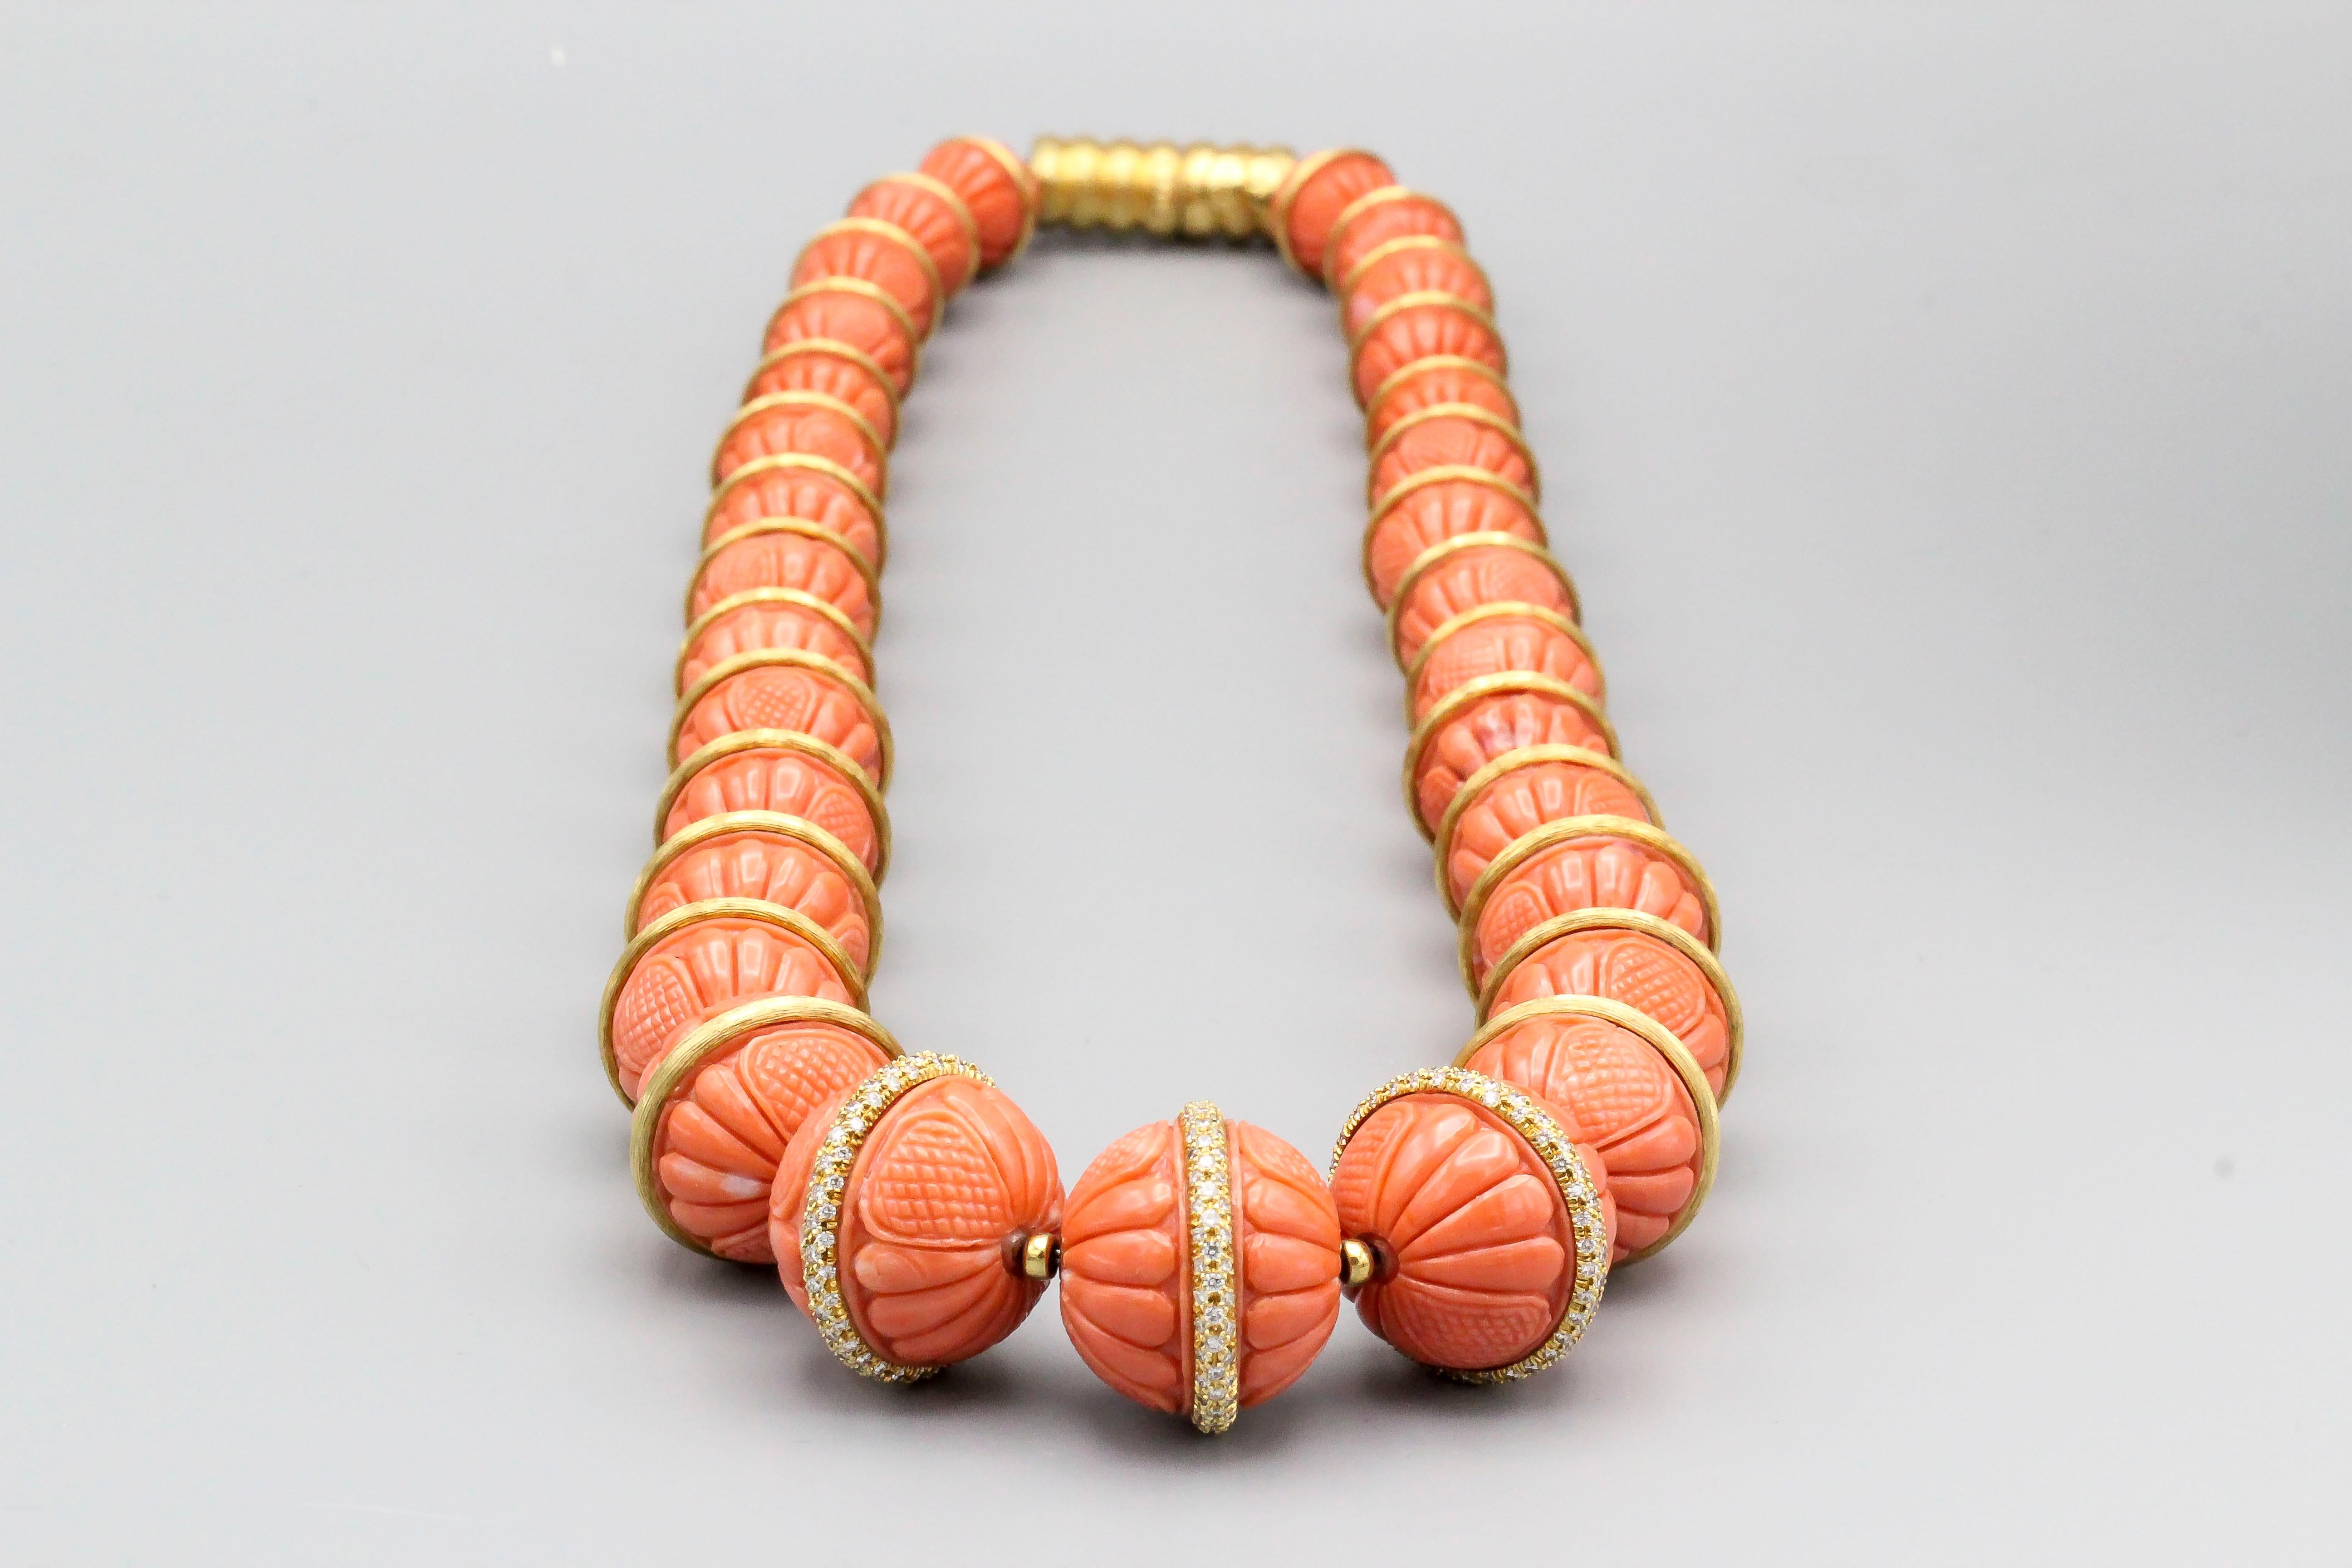 Impressive coral, diamond and 18K yellow gold necklace by Henry Dunay. The coral beads on necklace range in size from 11mm to 20mm in diameter. The corals are a rich salmon color and feature fine carvings on each bead; they are further accentuated